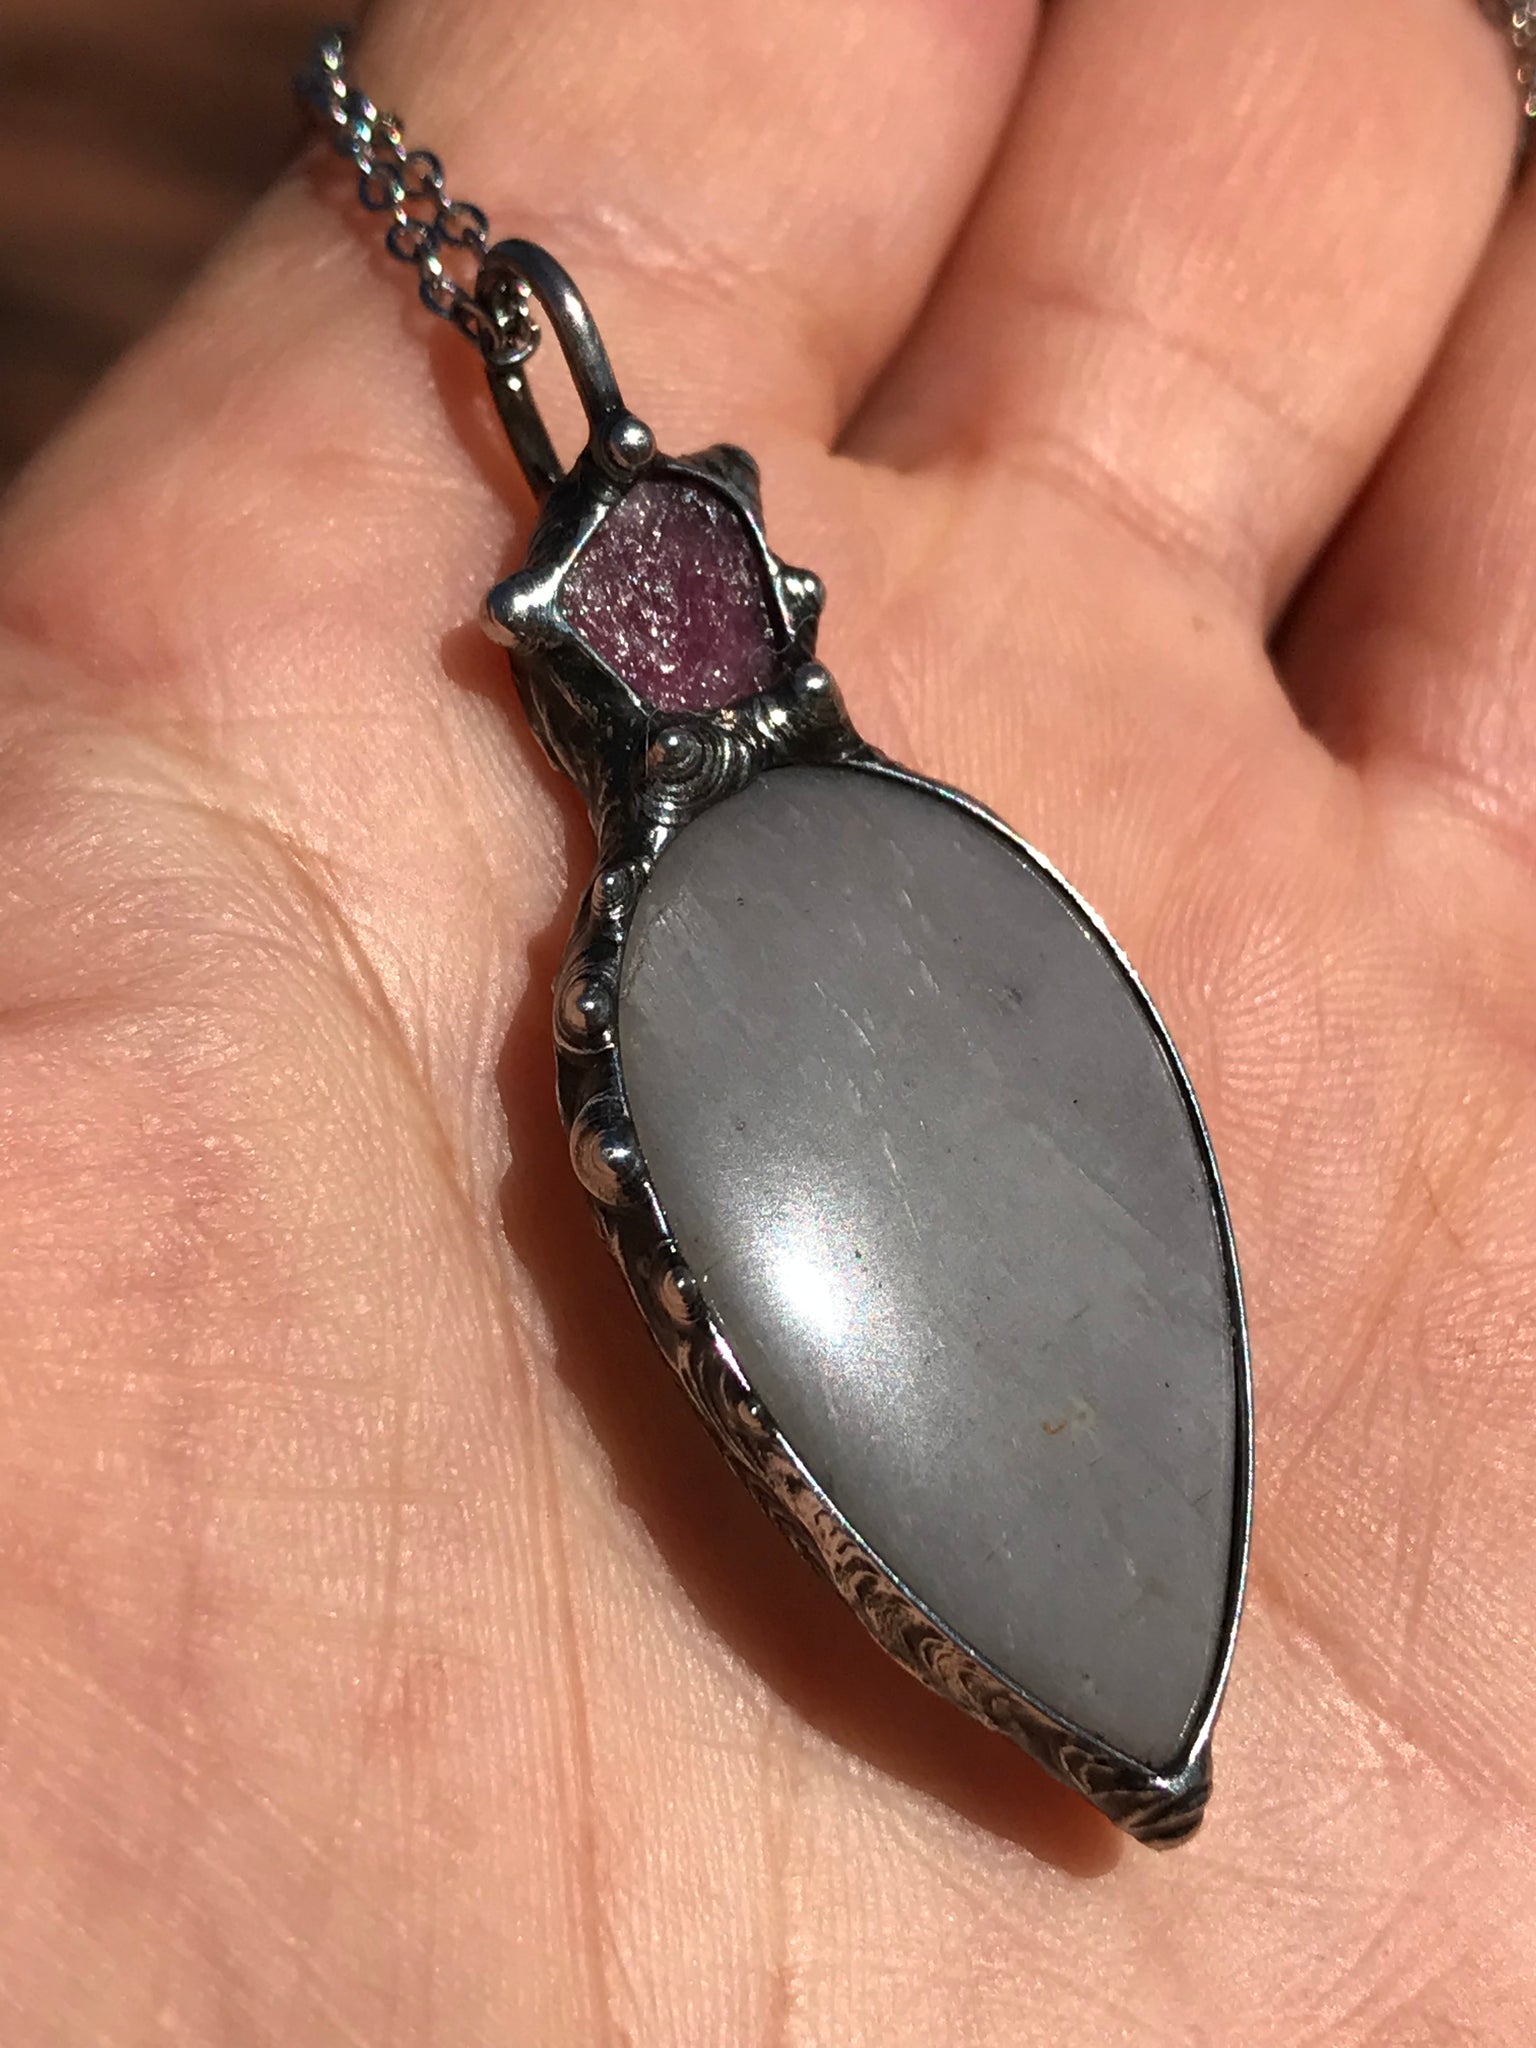 Silver Moonstone combined with pink rough tourmaline